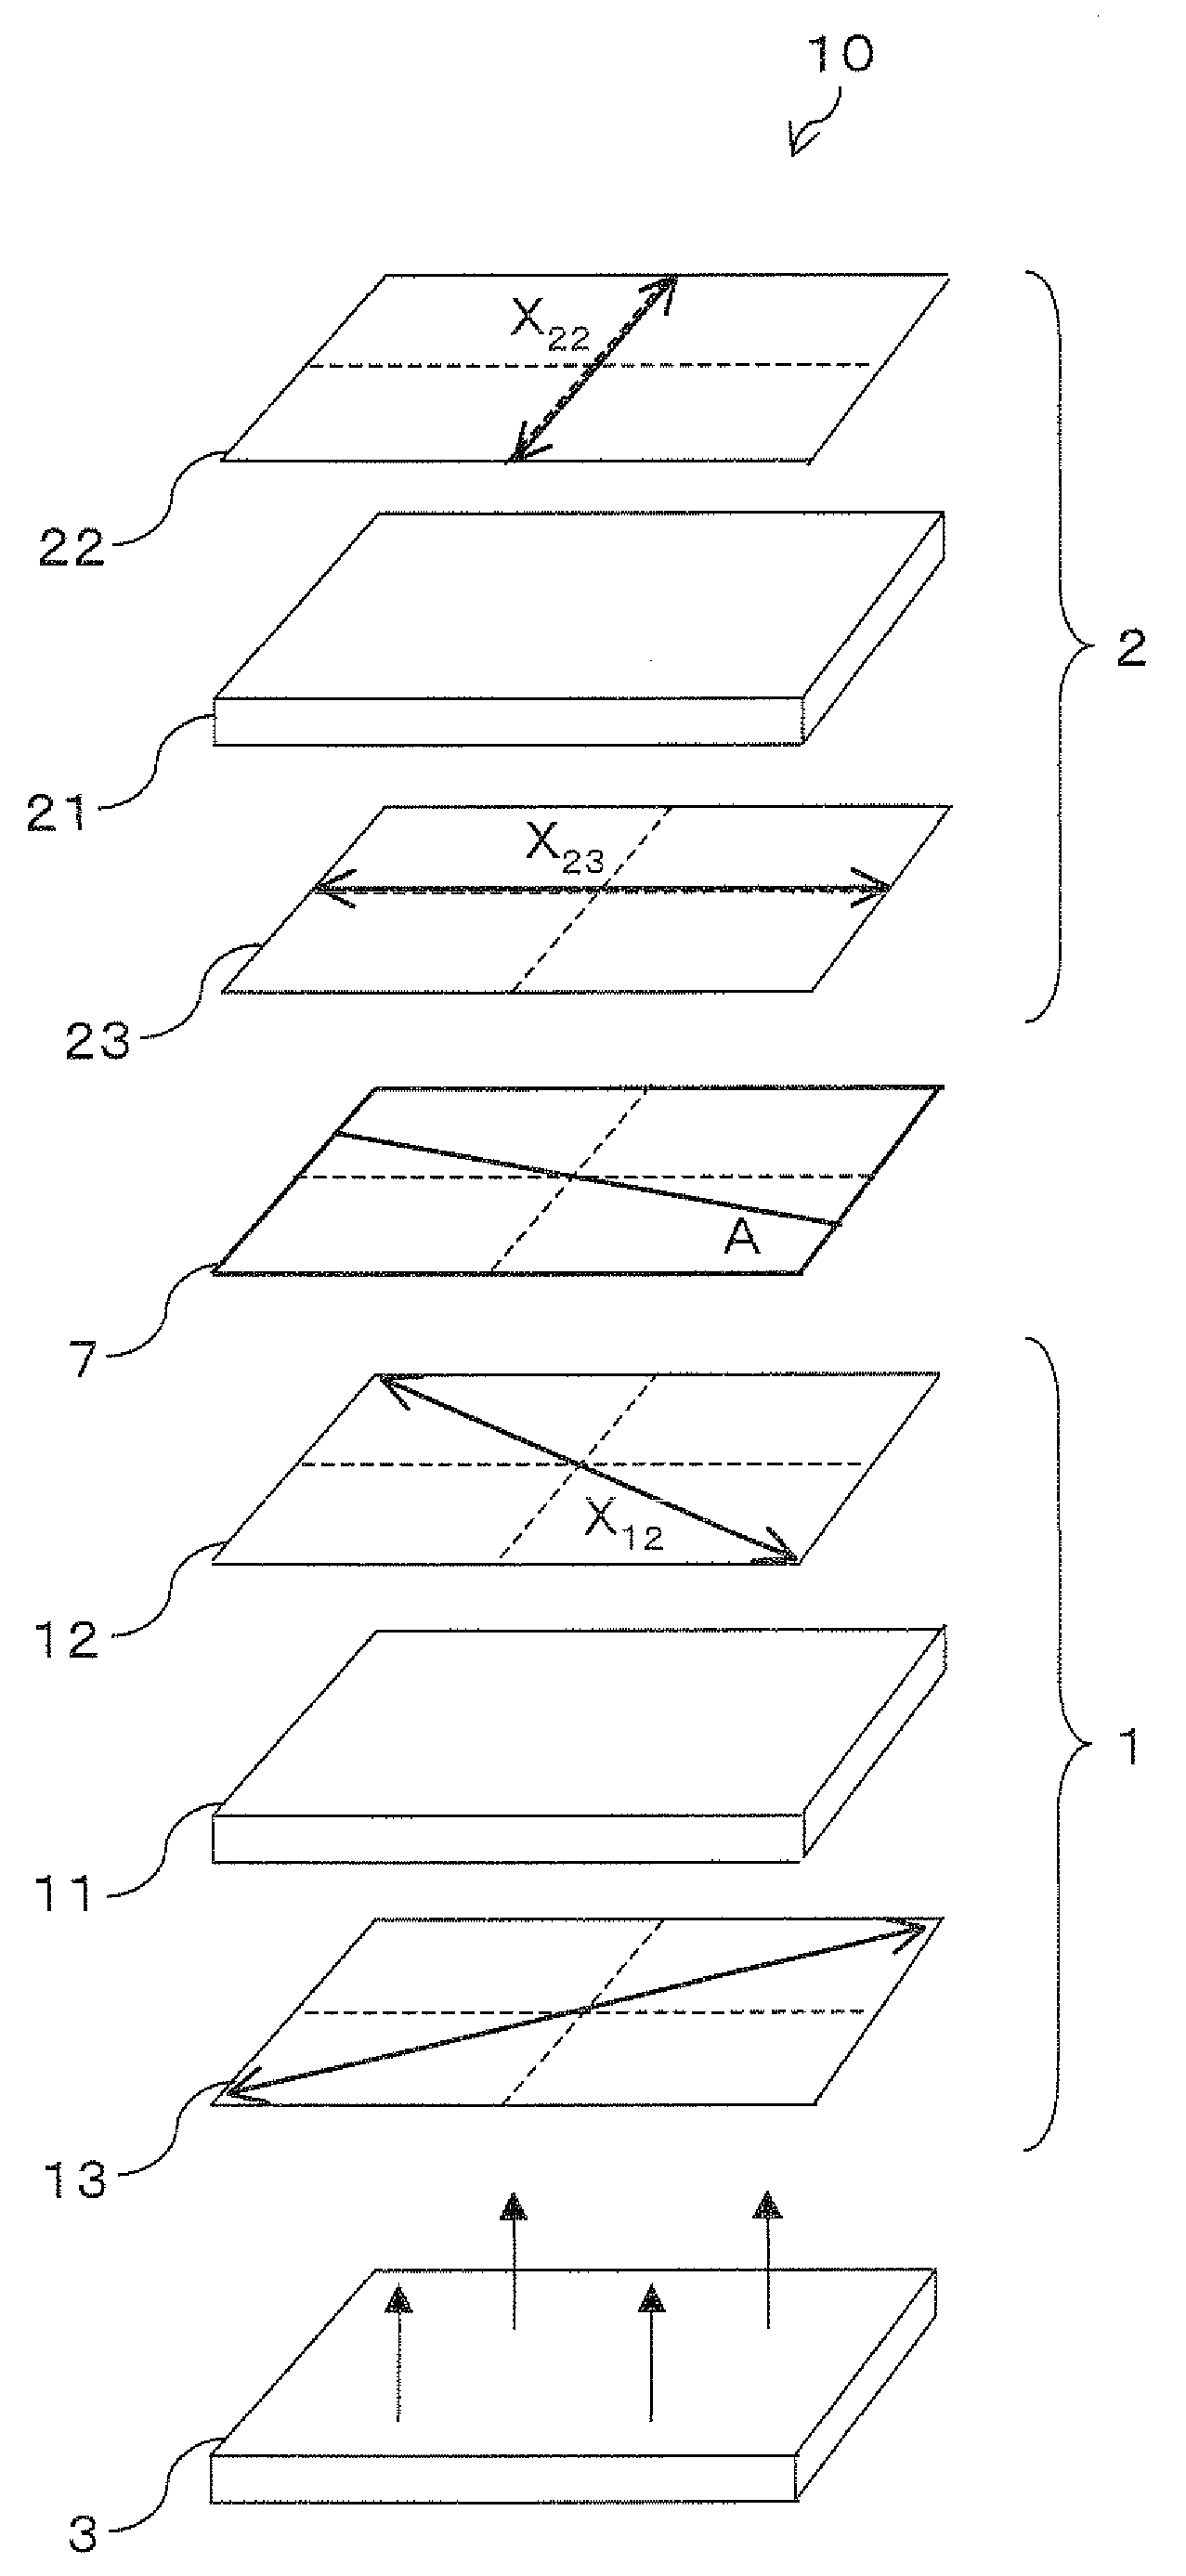 Liquid crystal display device and viewing angle control module